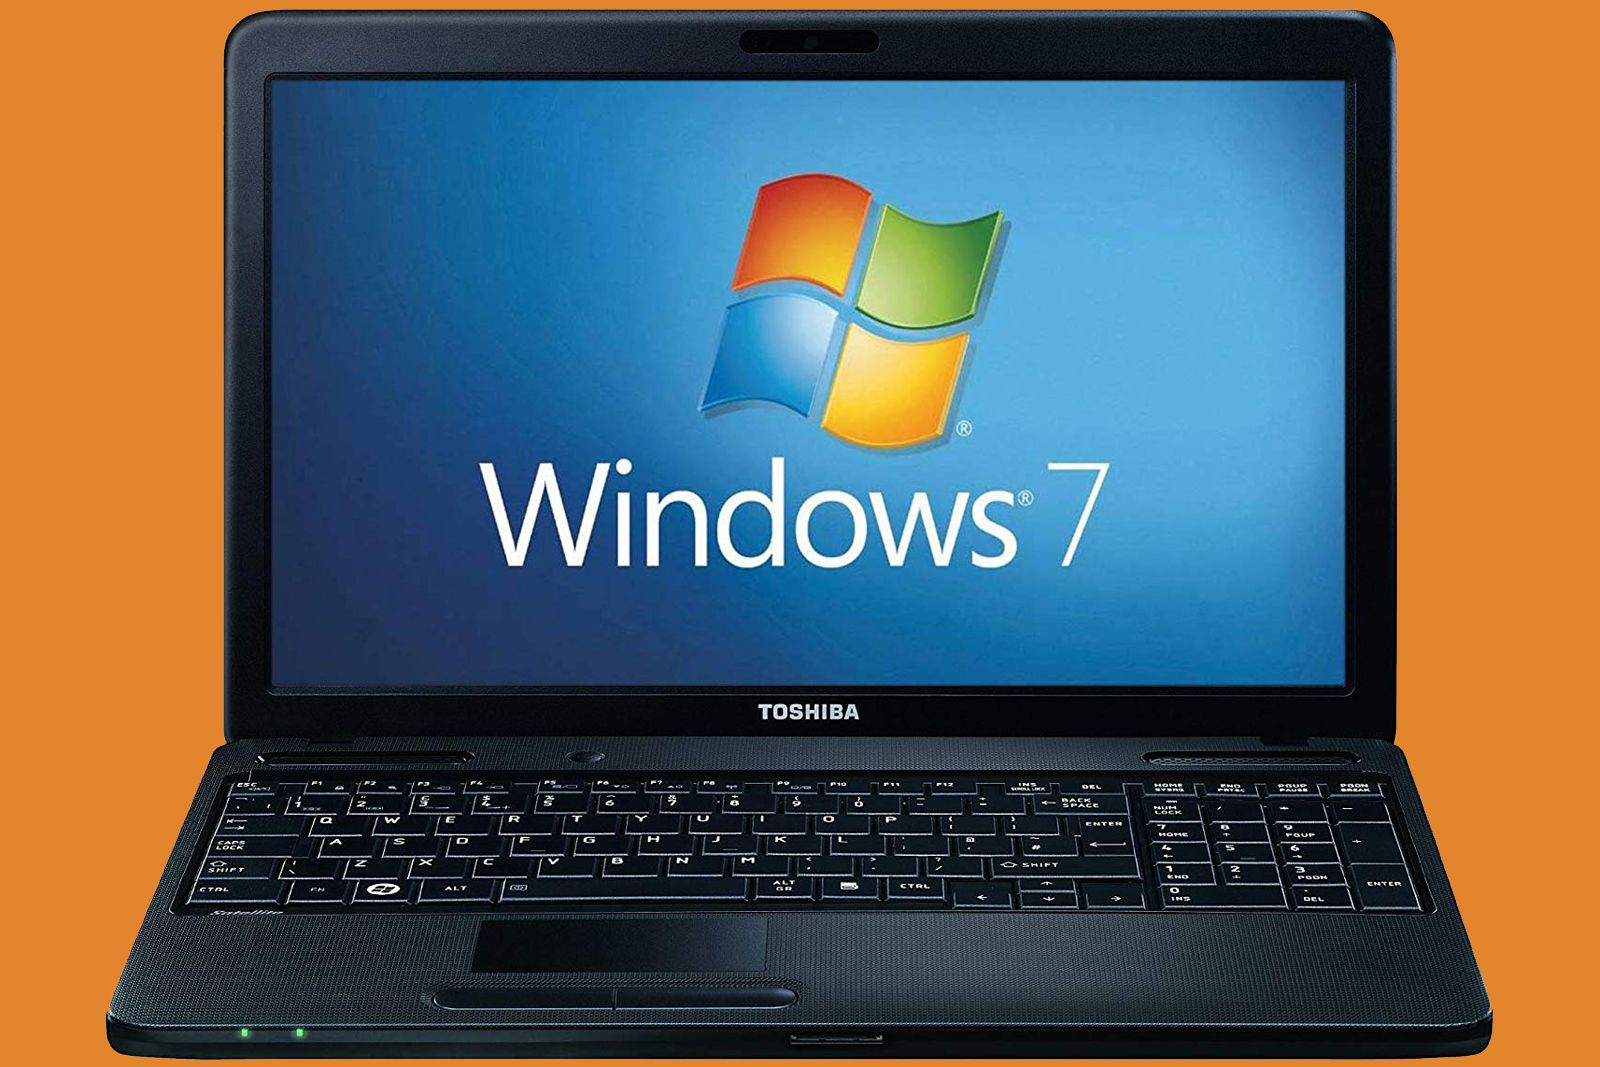 Goodbye Windows 7 - but why are people still using it?